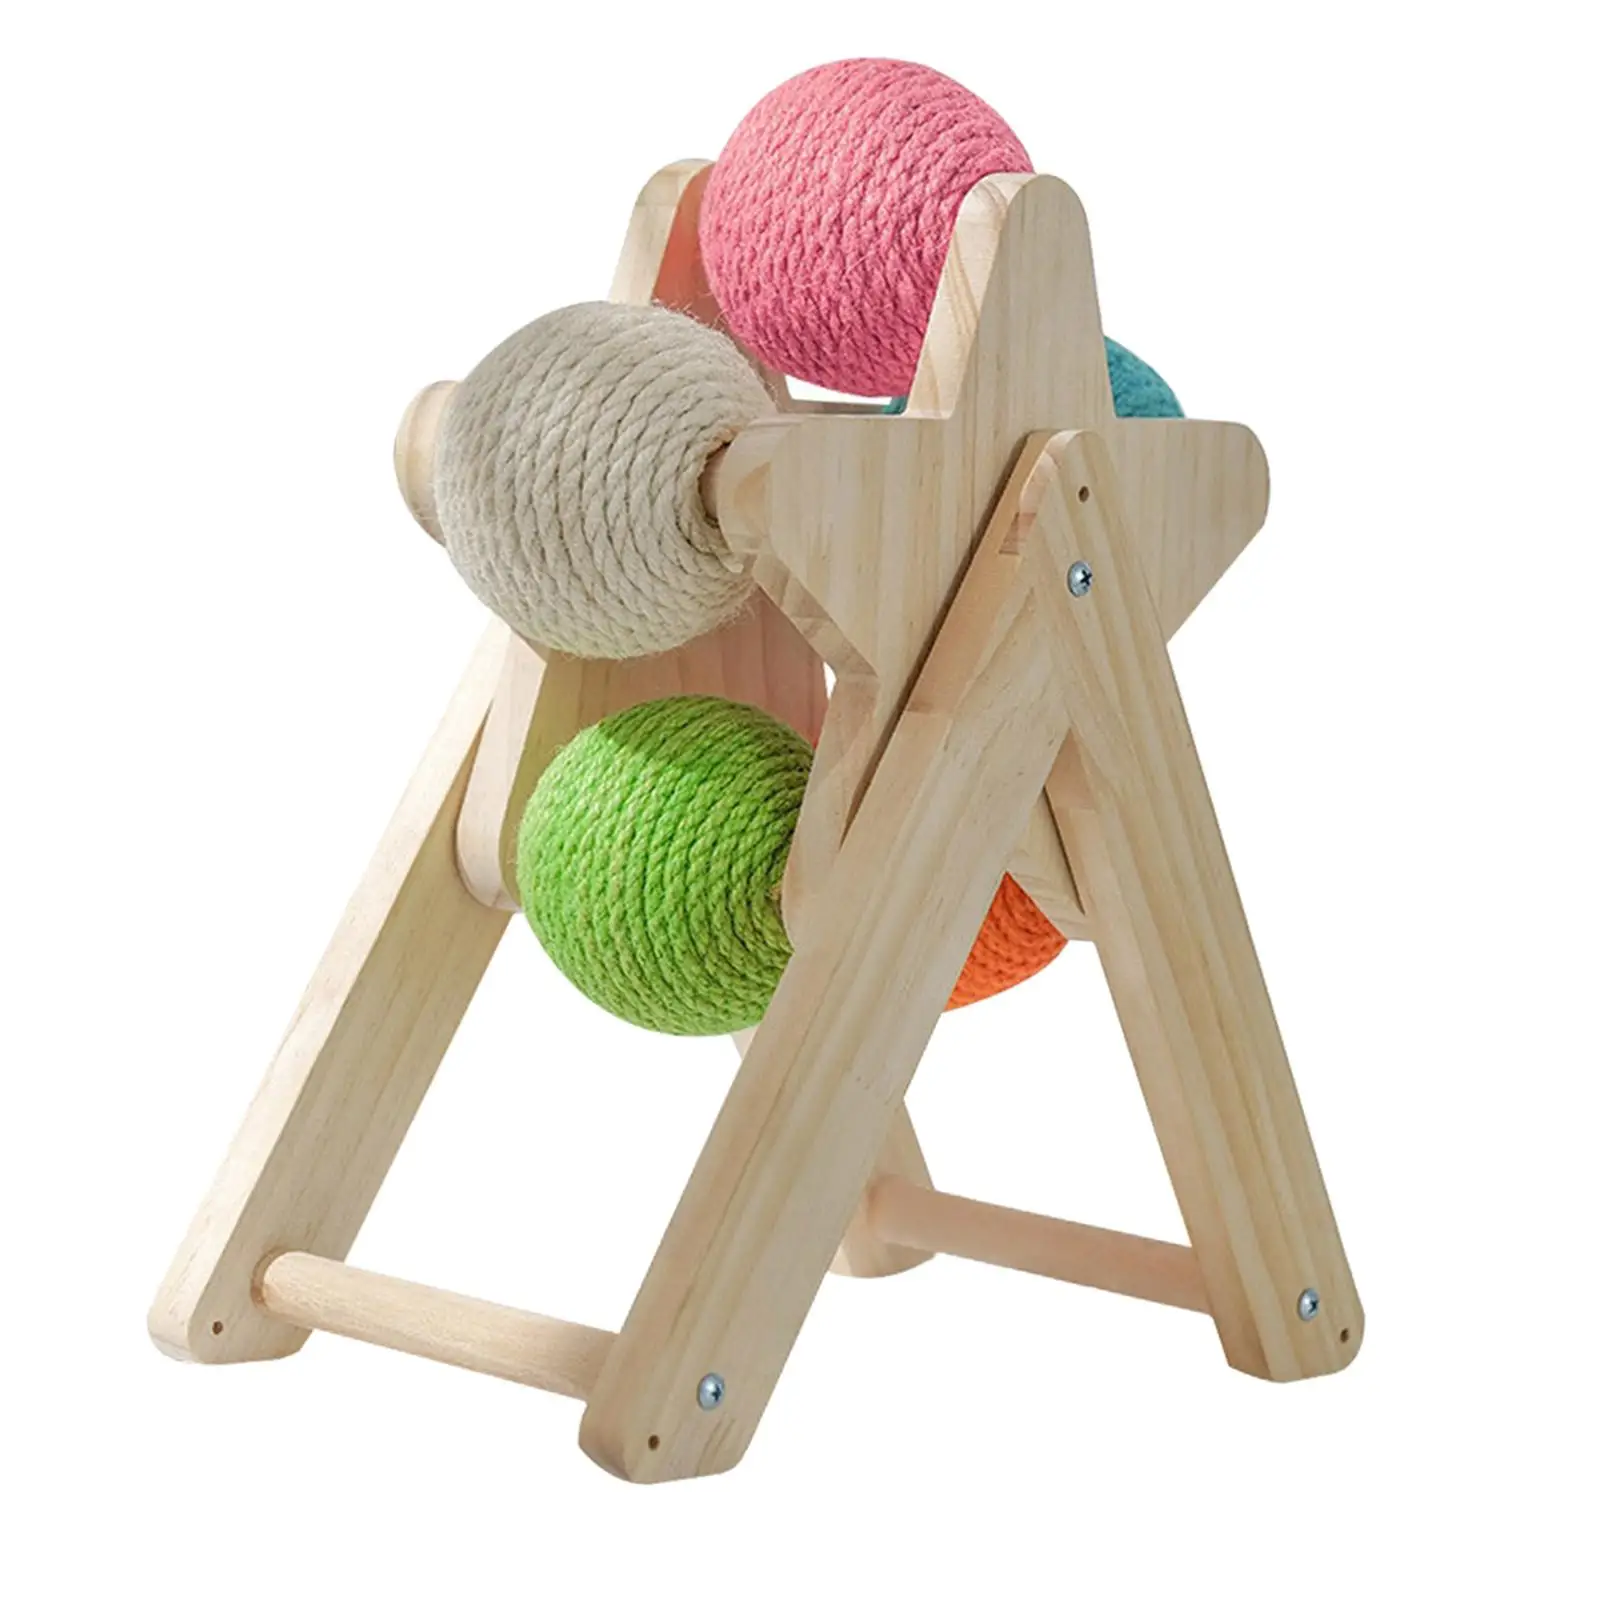 Wooden Cat Scratching Ball Pet Furniture Sisal Solid Wood Vertical Interactive Wear Resistant Sisal Rope Balls Scratcher Toy